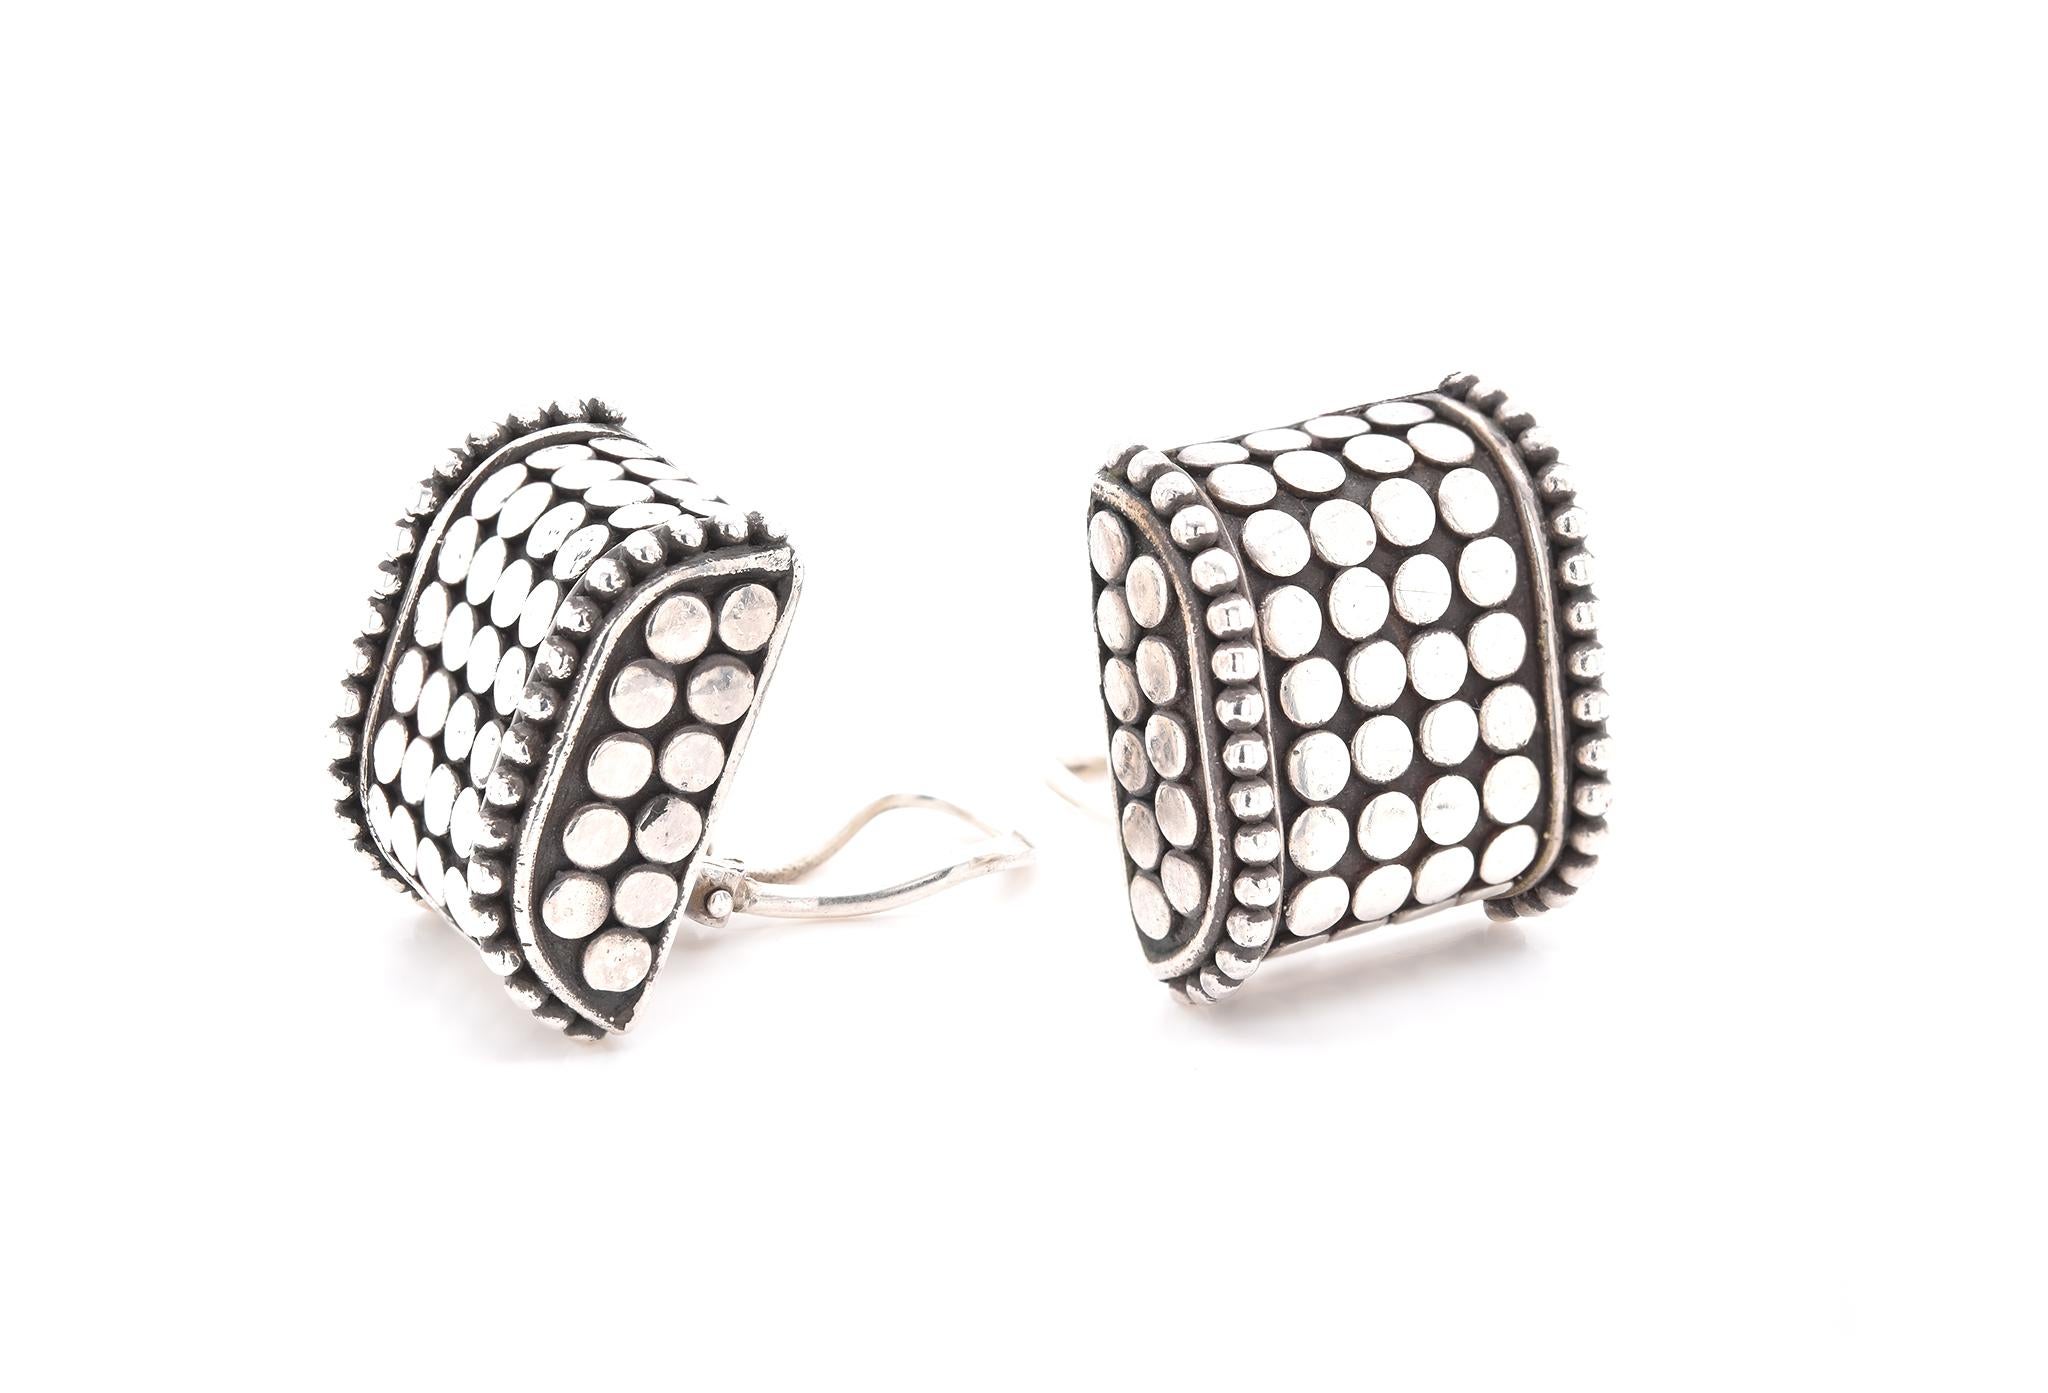 Designer: John Hardy
Collection: Dot collection
Material: sterling silver
Dimensions: earrings measure 20.84mm by 17.80mm 
Fastenings: clip-on
Weight: 17.44 grams
